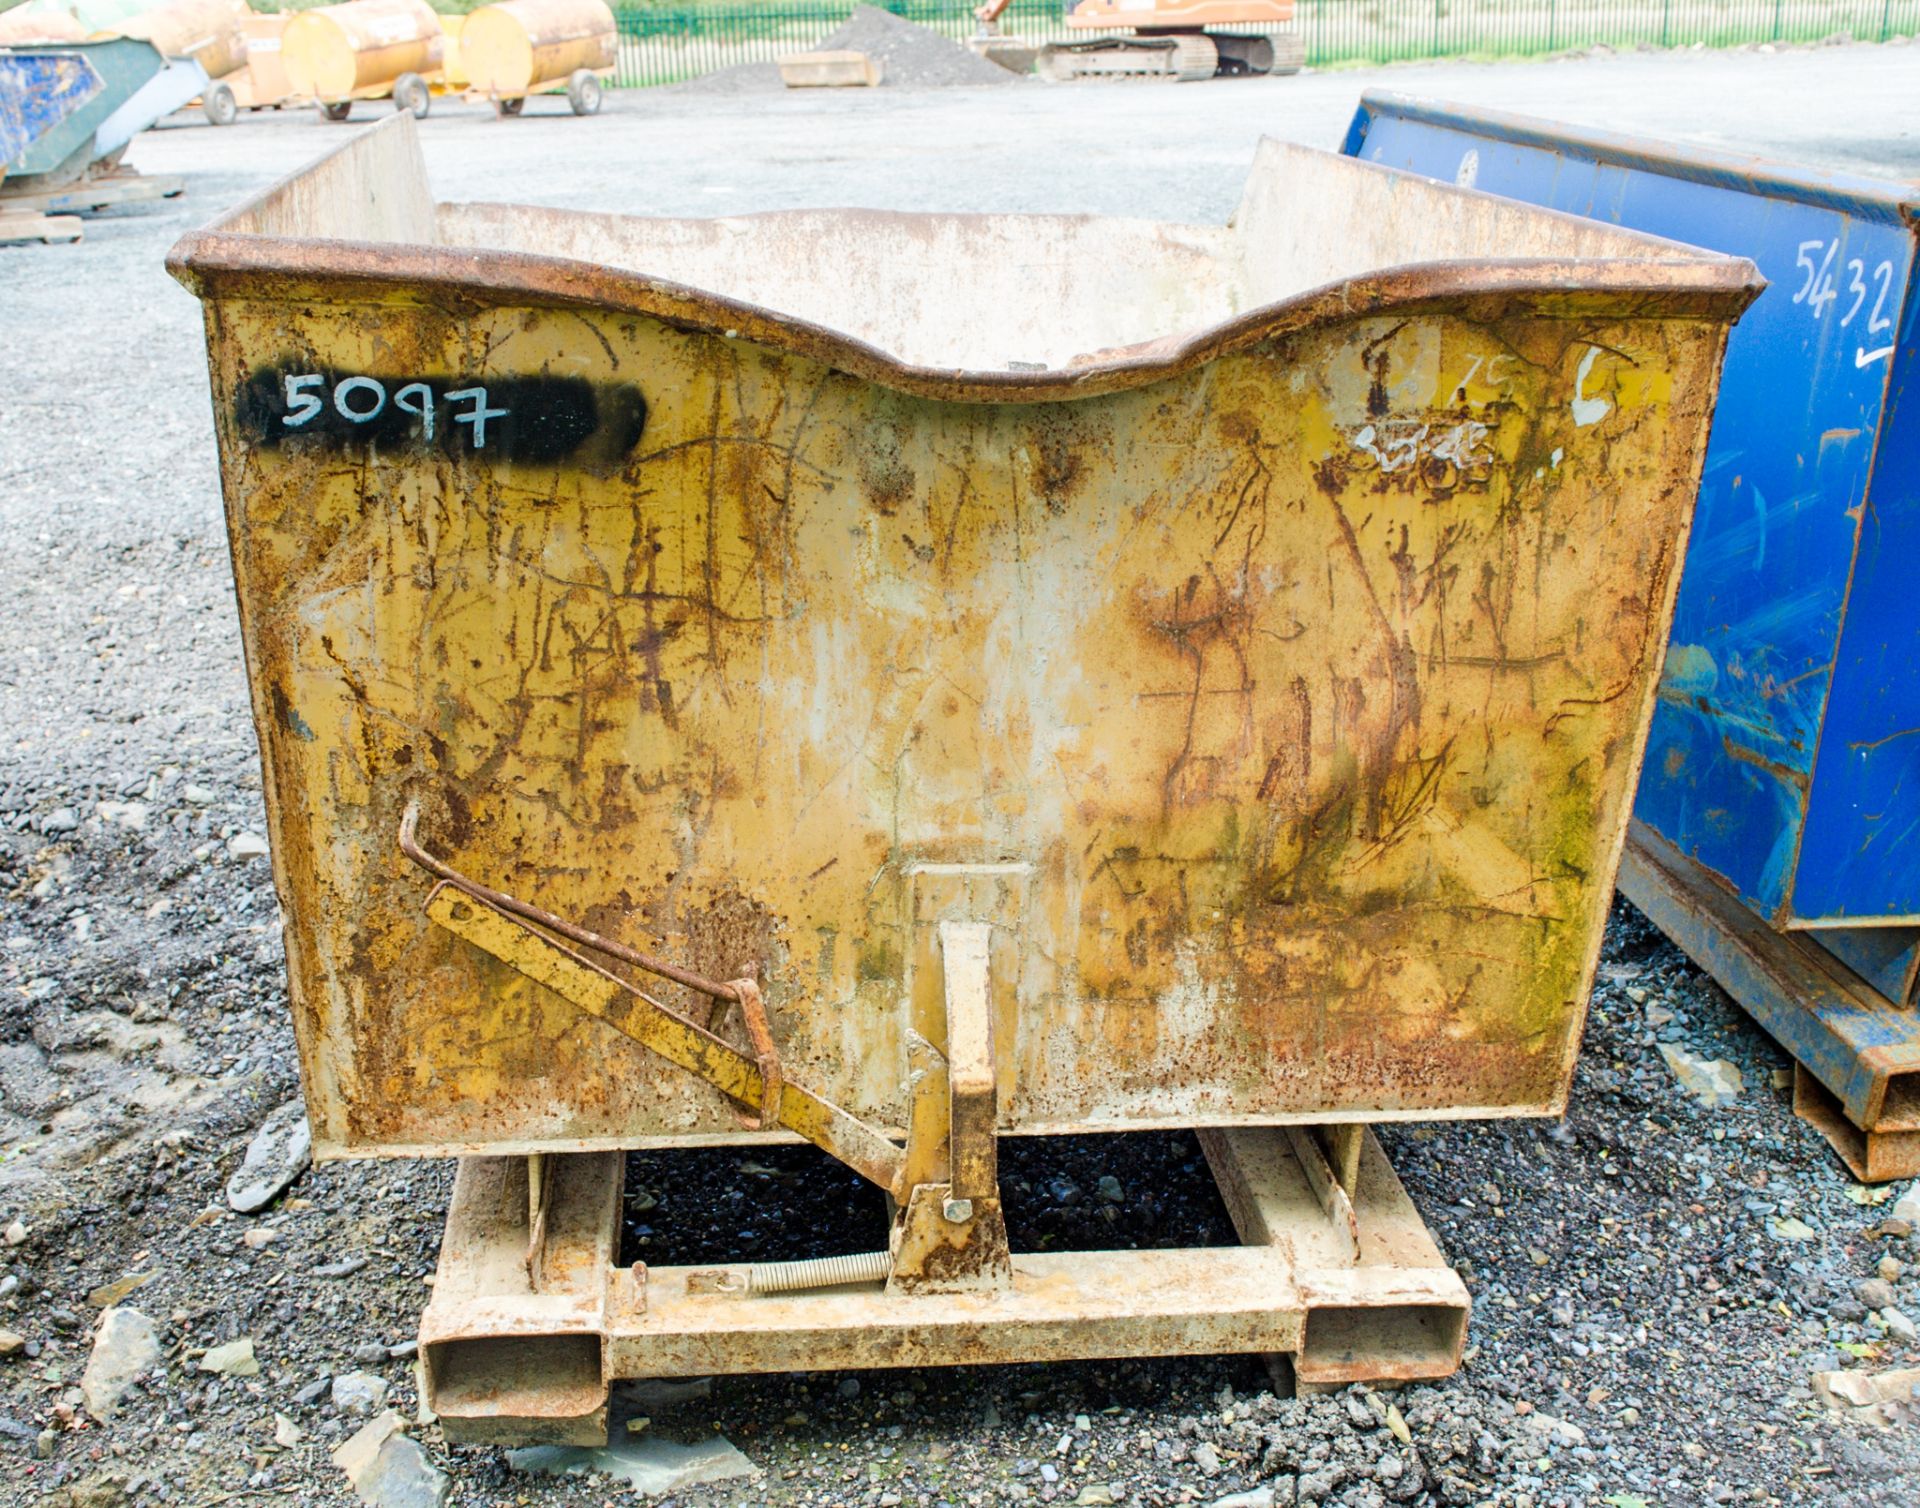 DTEC tipping skip - Image 2 of 2